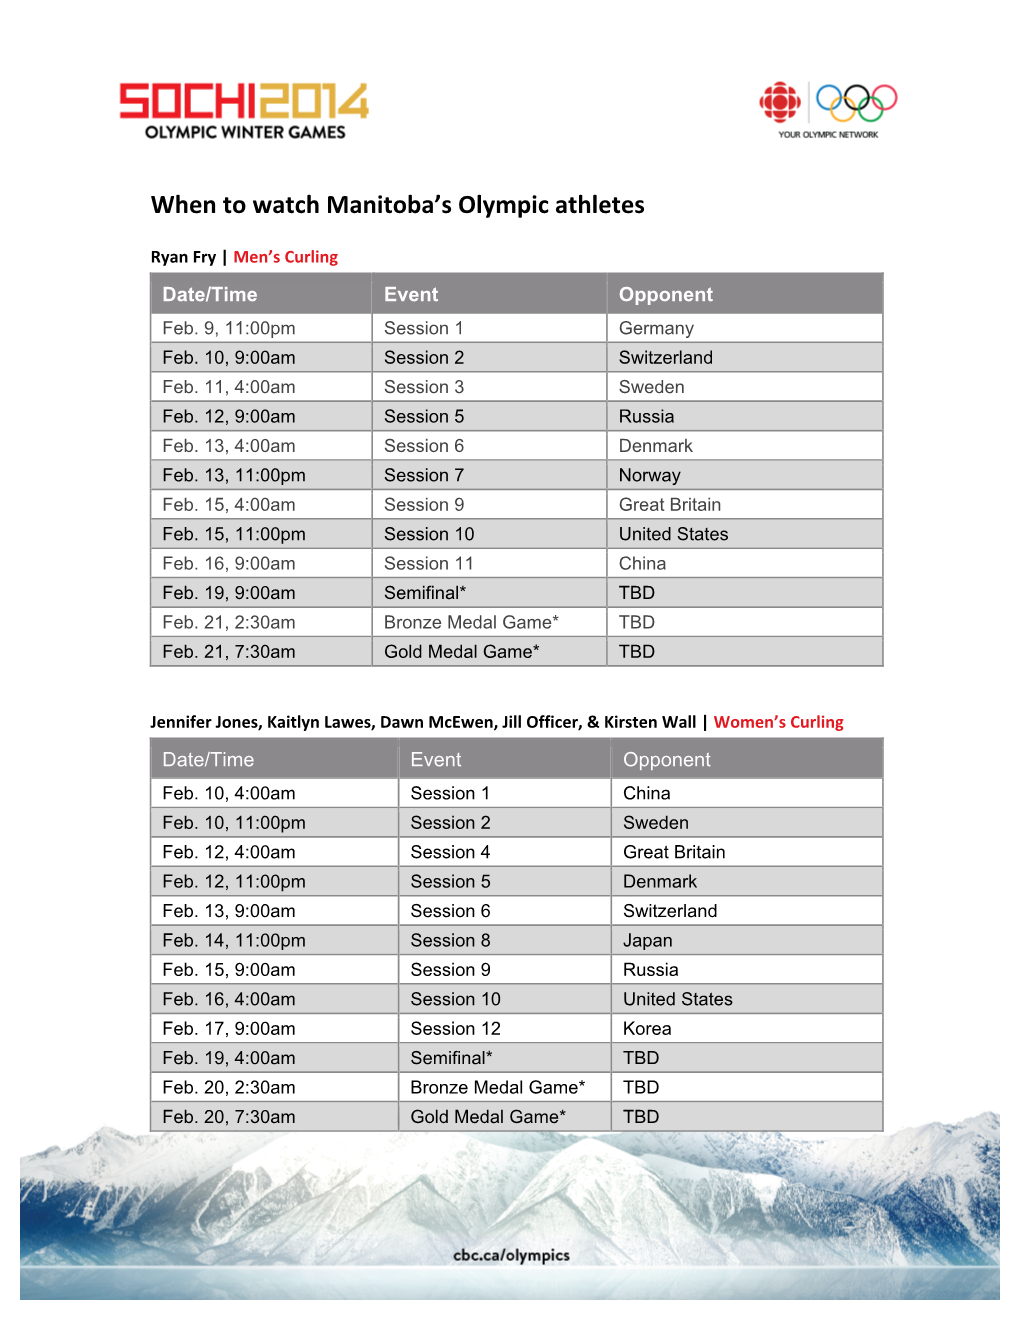 When to Watch Manitoba's Olympic Athletes